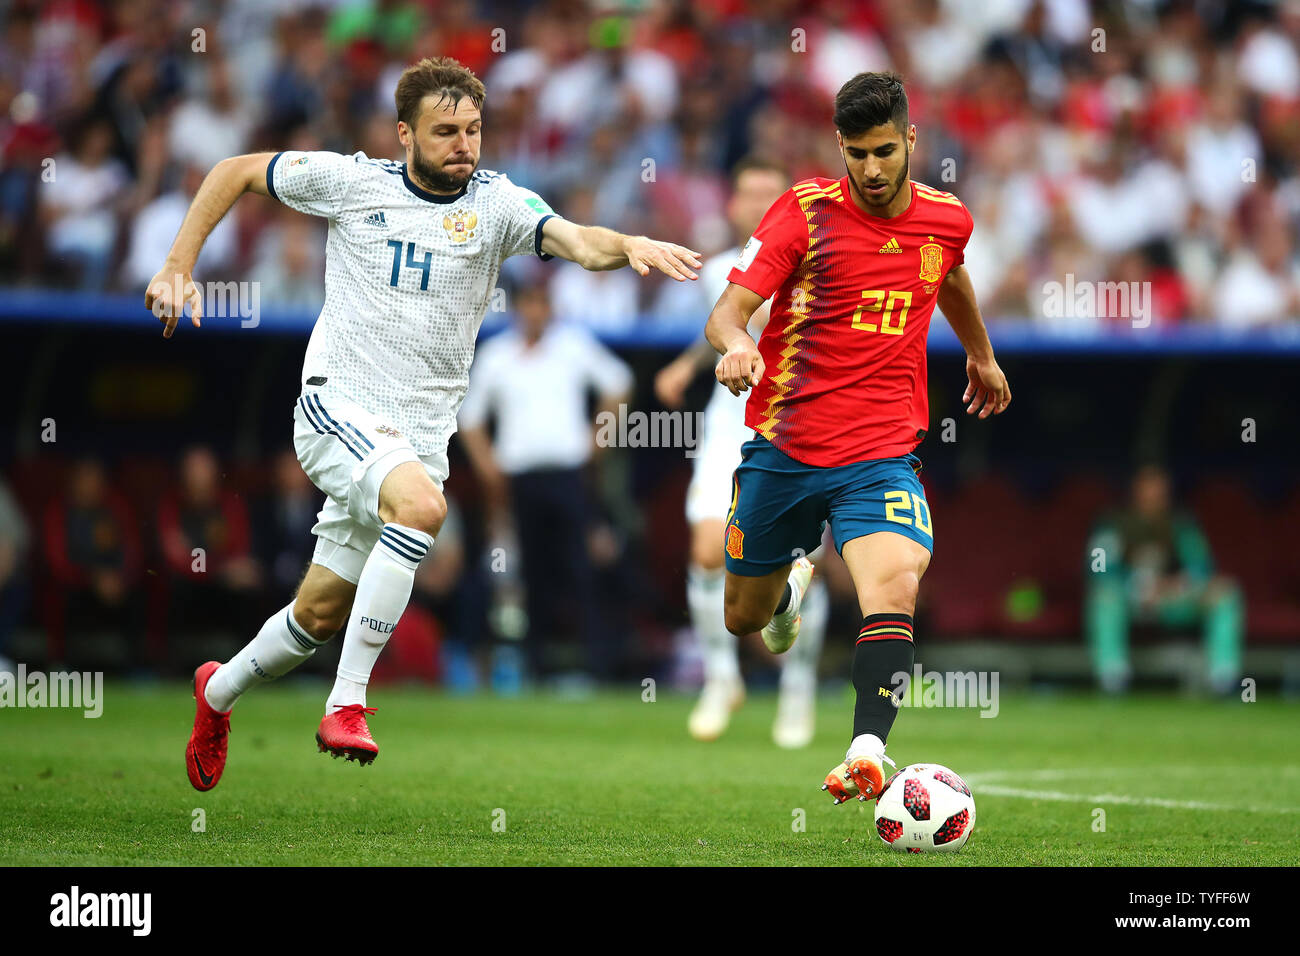 Marco Asensio (R) of Spain competes for the ball with Vladimir Granat of Russia during the 2018 FIFA World Cup Round of 16 match at Luzhniki Stadium in Moscow, Russia on July 1, 2018.  Russia beat Spain 4-2 on penalties to qualify for the quarter-finals. Photo by Chris Brunskill/UPI Stock Photo